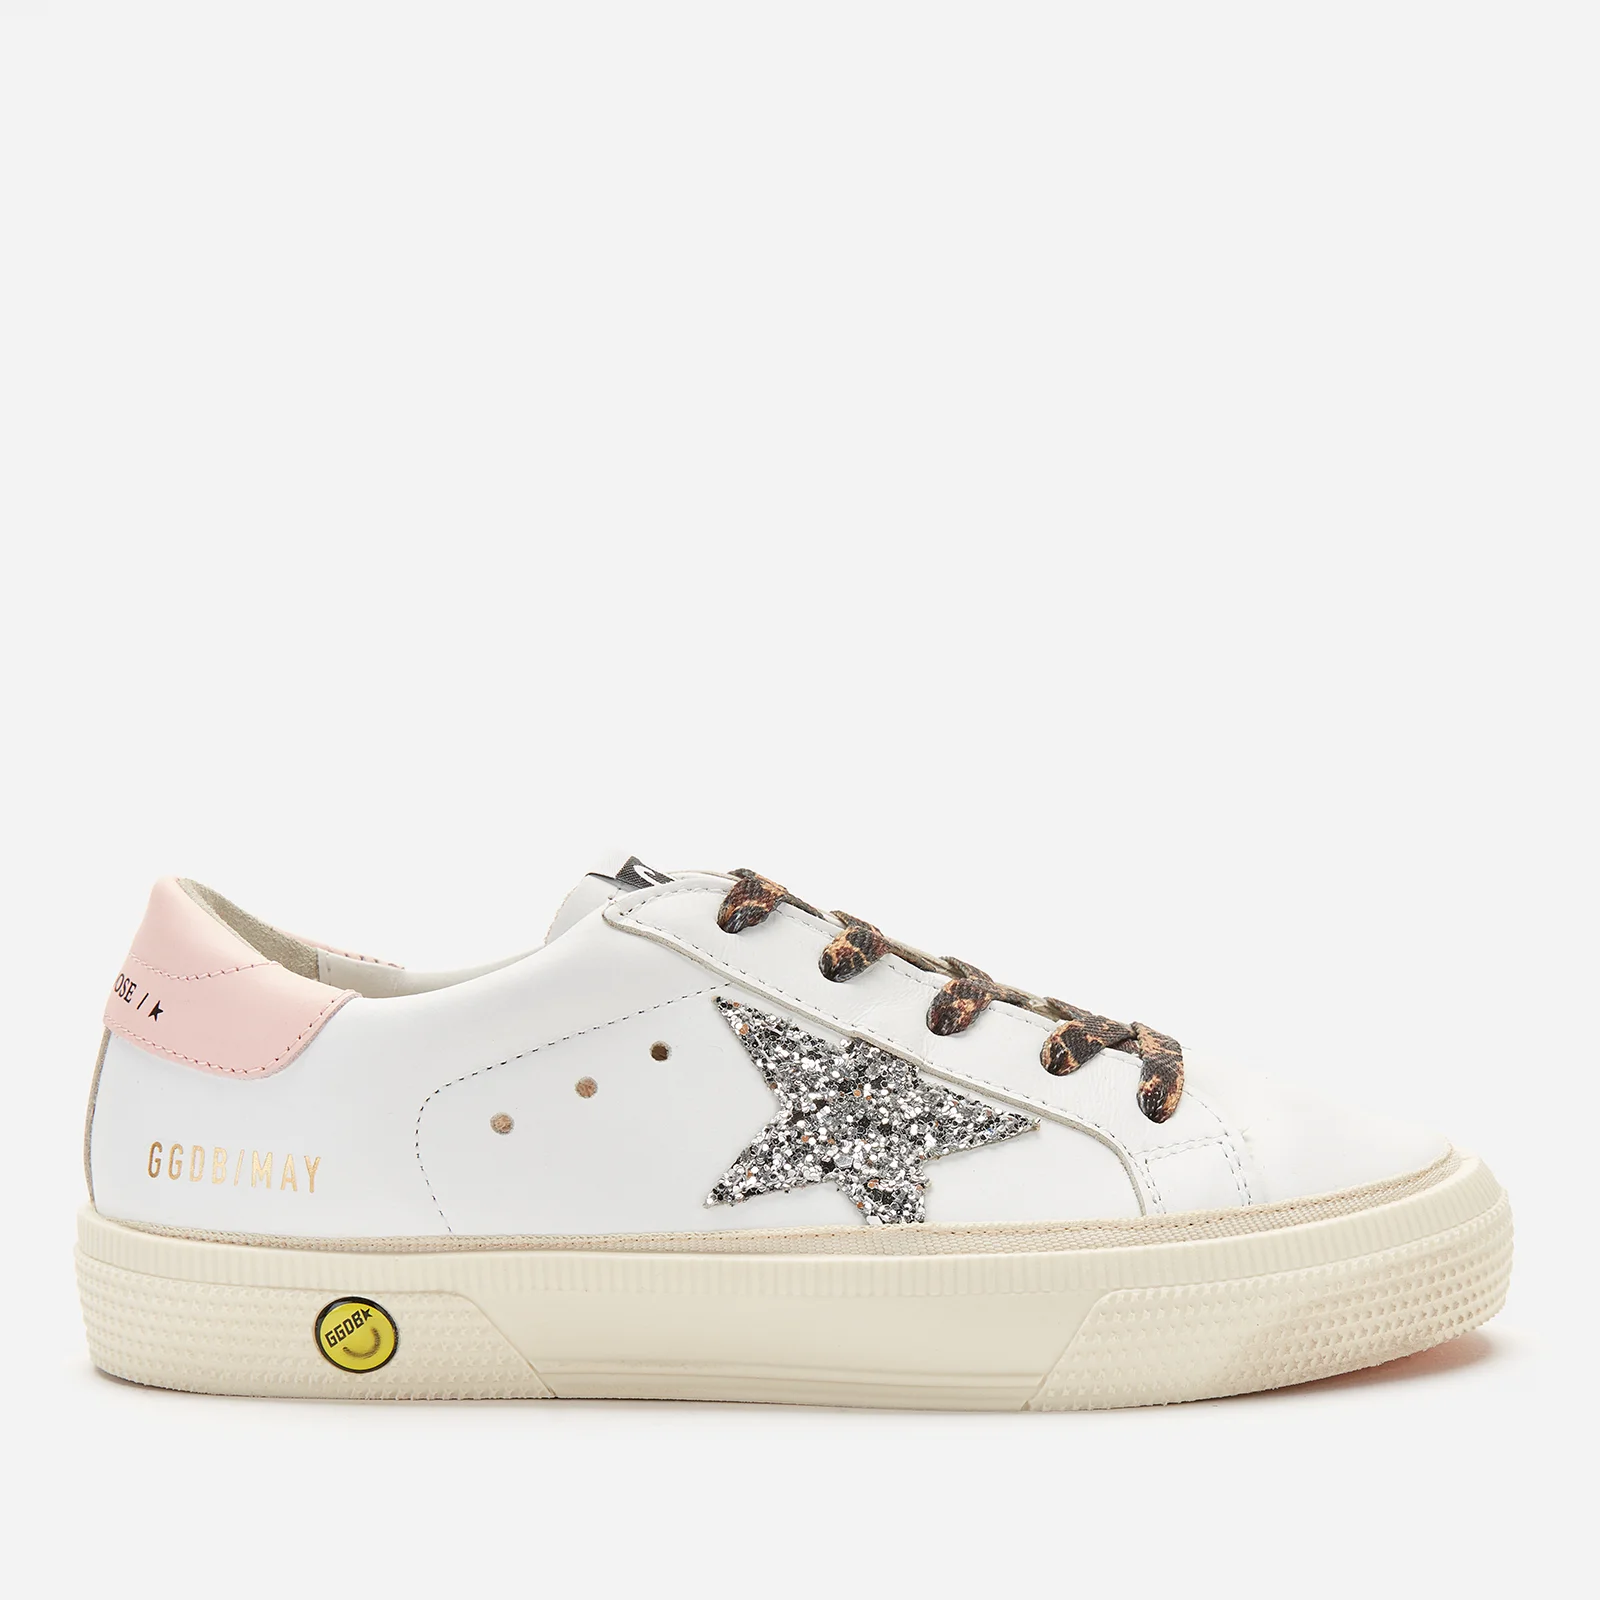 Golden Goose Kids' Leather Upper And Heel Glitter Star Trainers - White/Silver/Rose Quartz Image 1